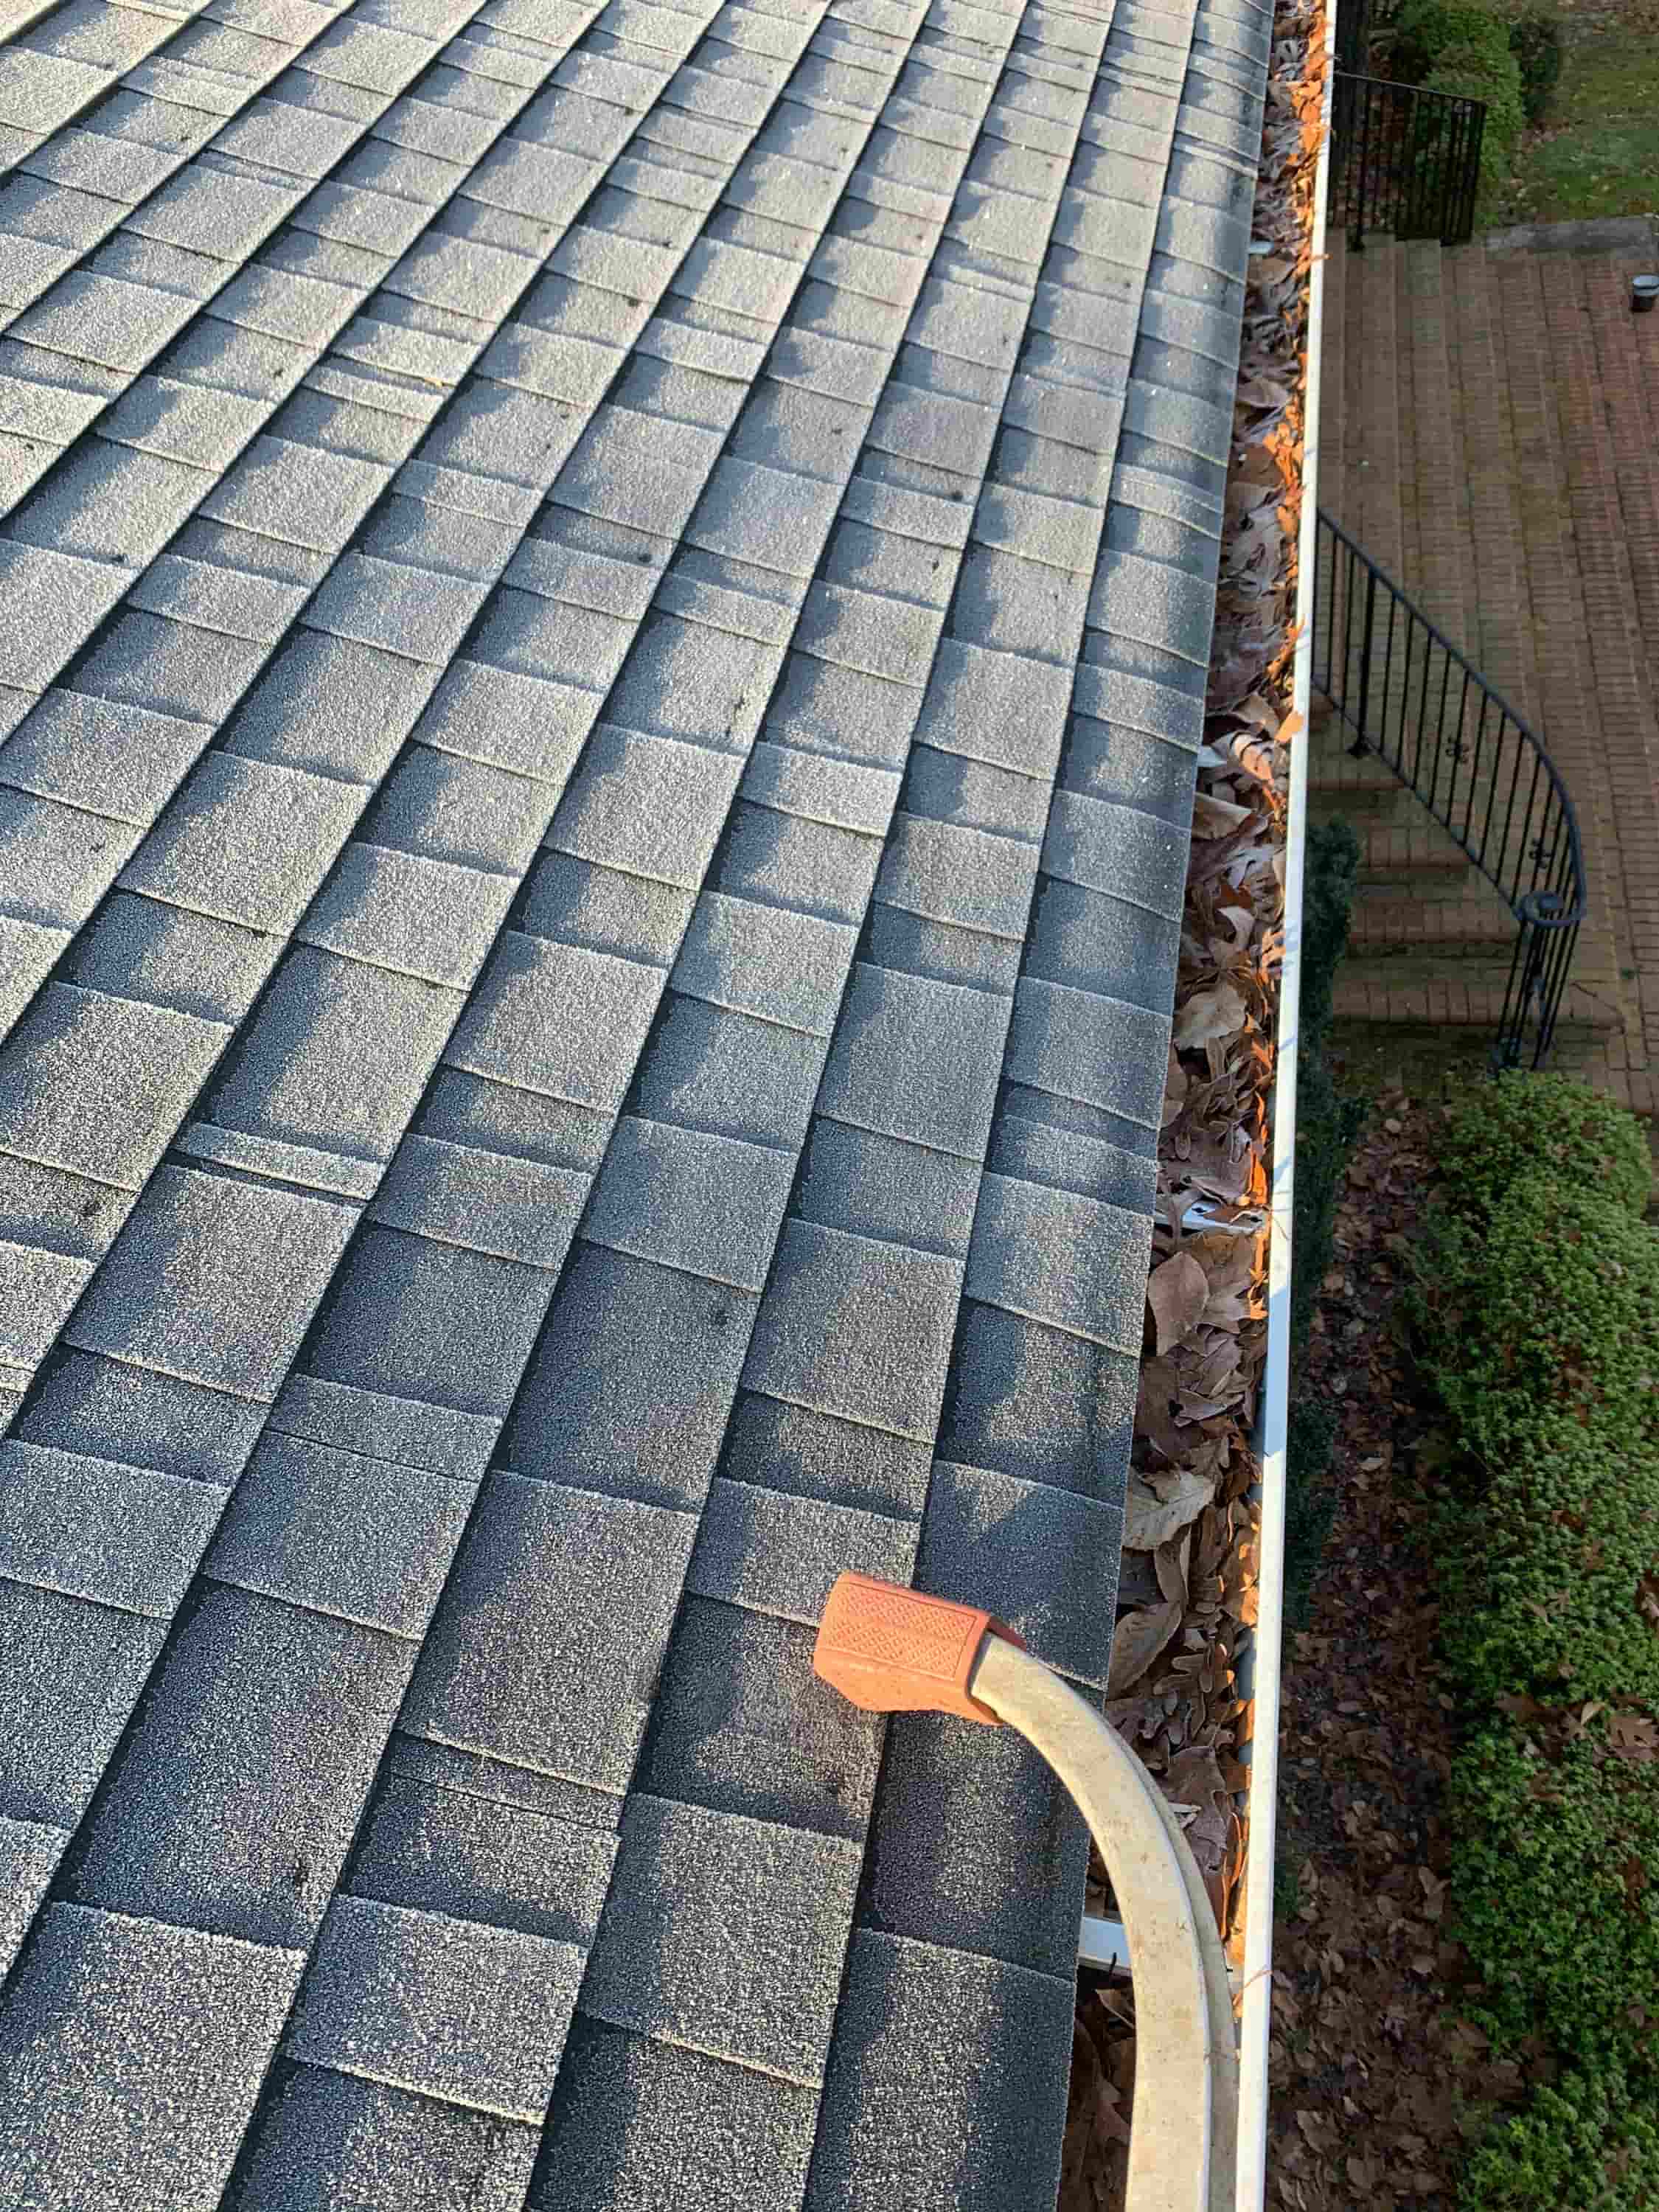 gutter cleaning without ladder